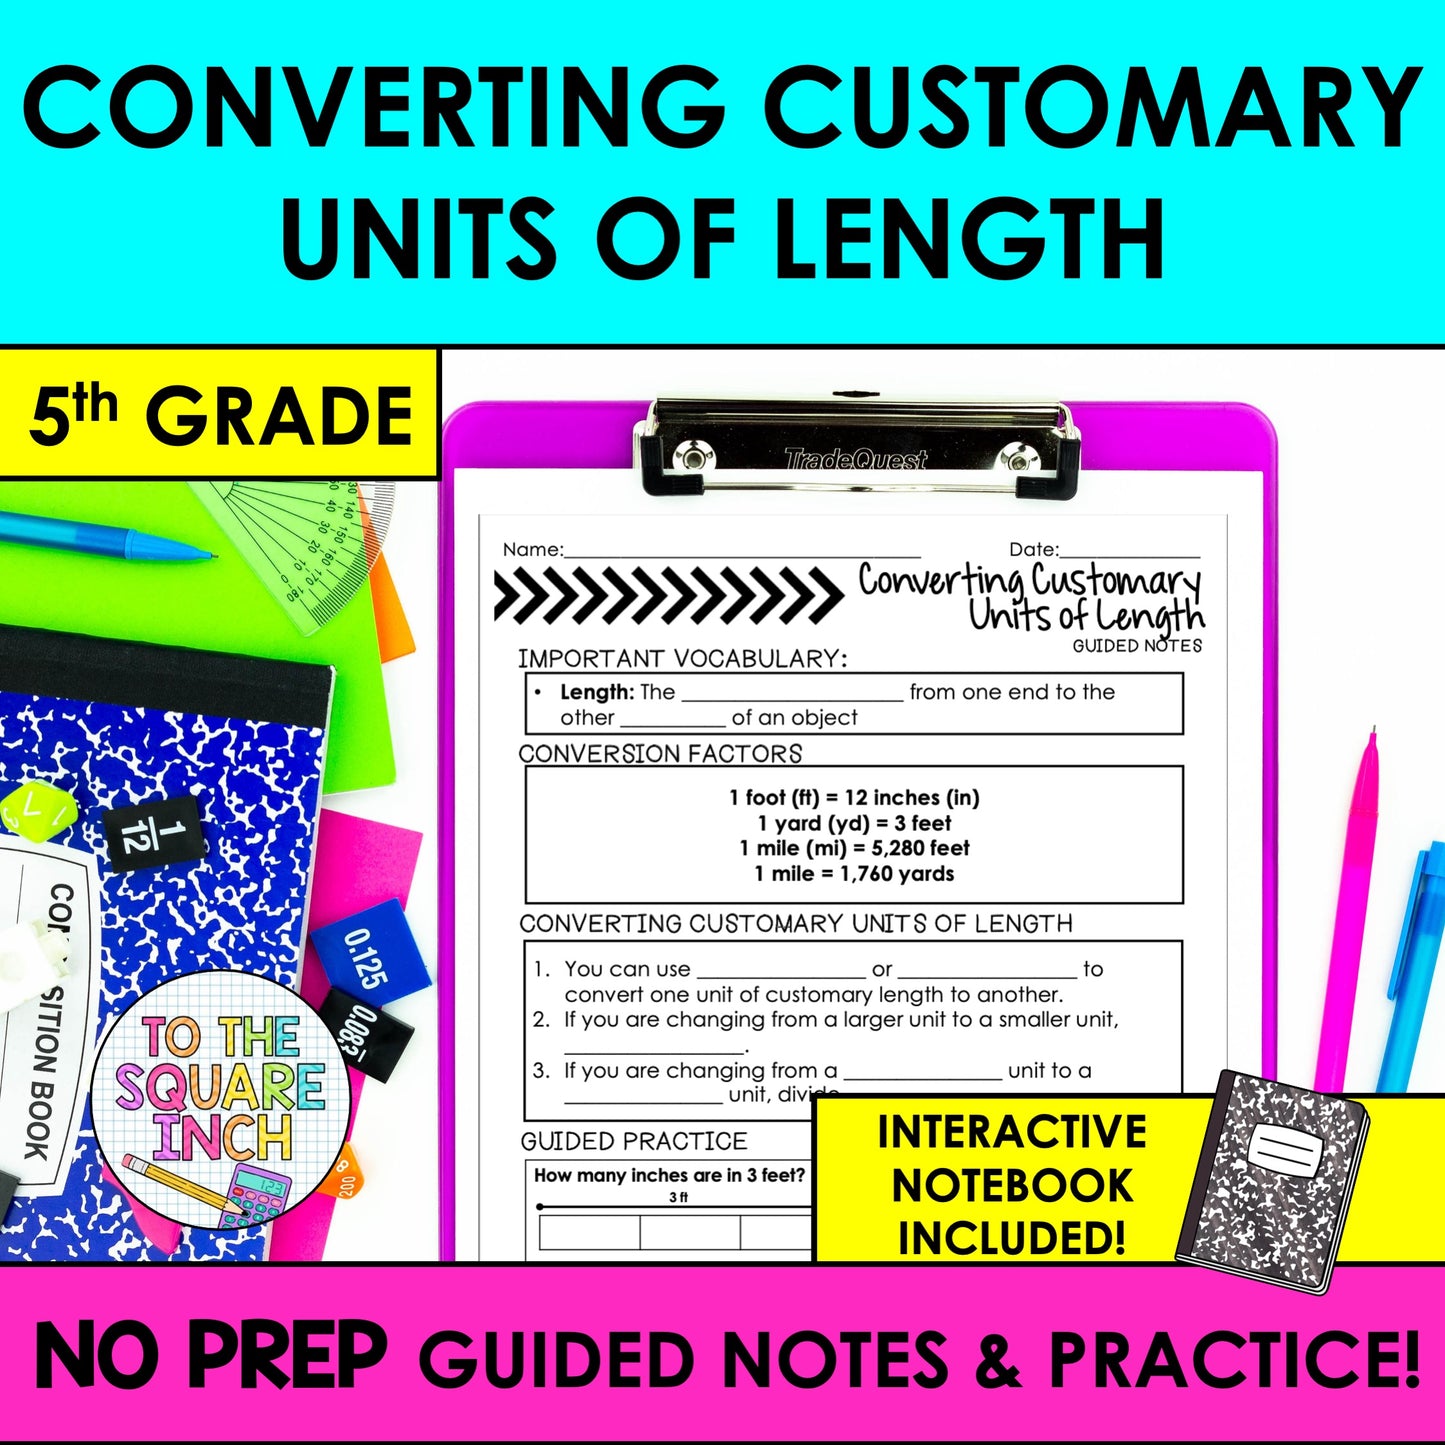 Converting Customary Units of Length Notes